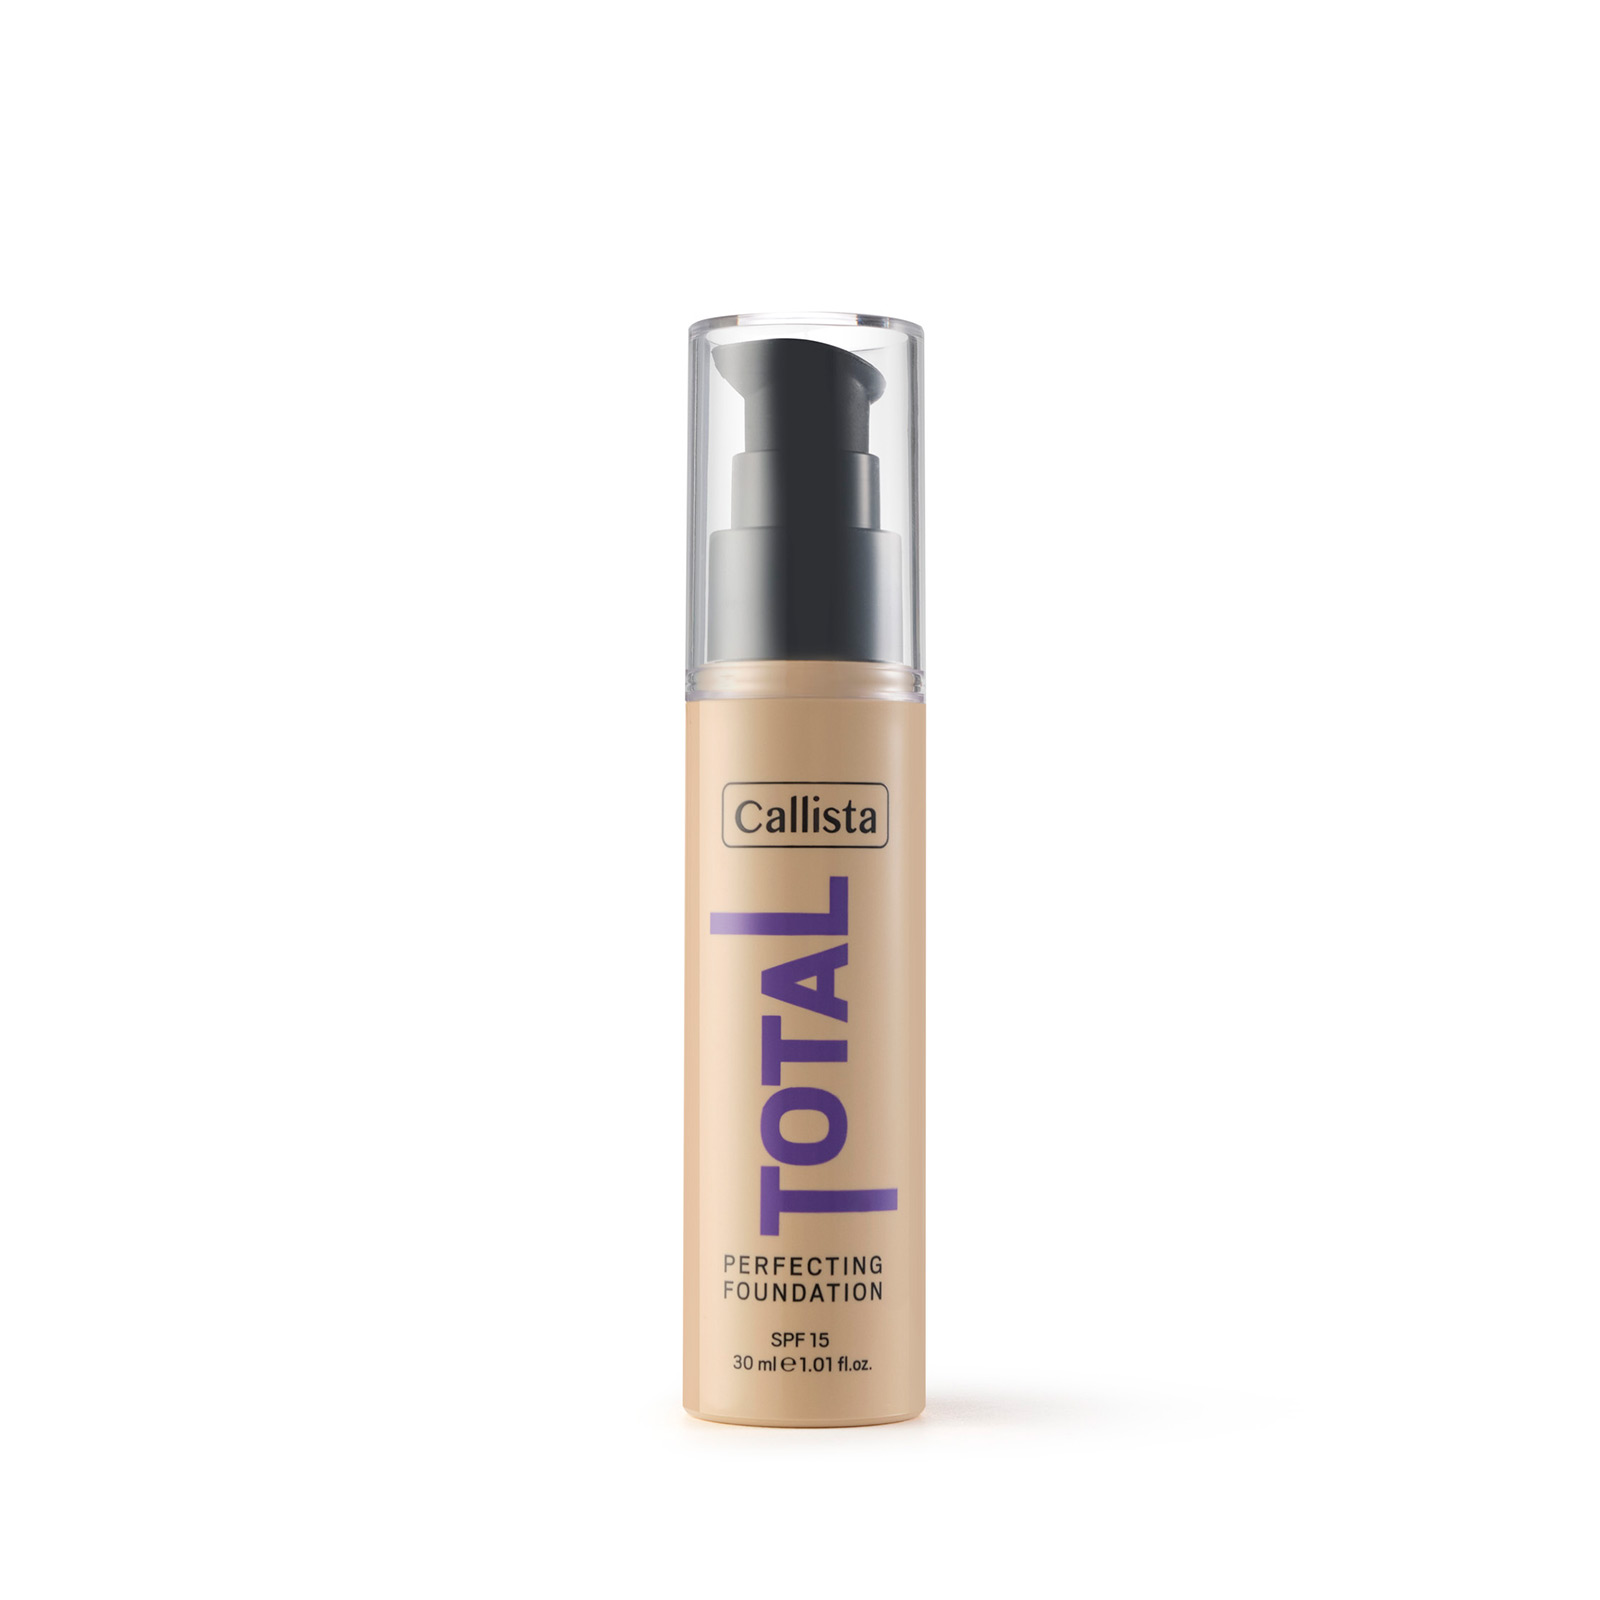 TOTAL PERFECTING FOUNDATION